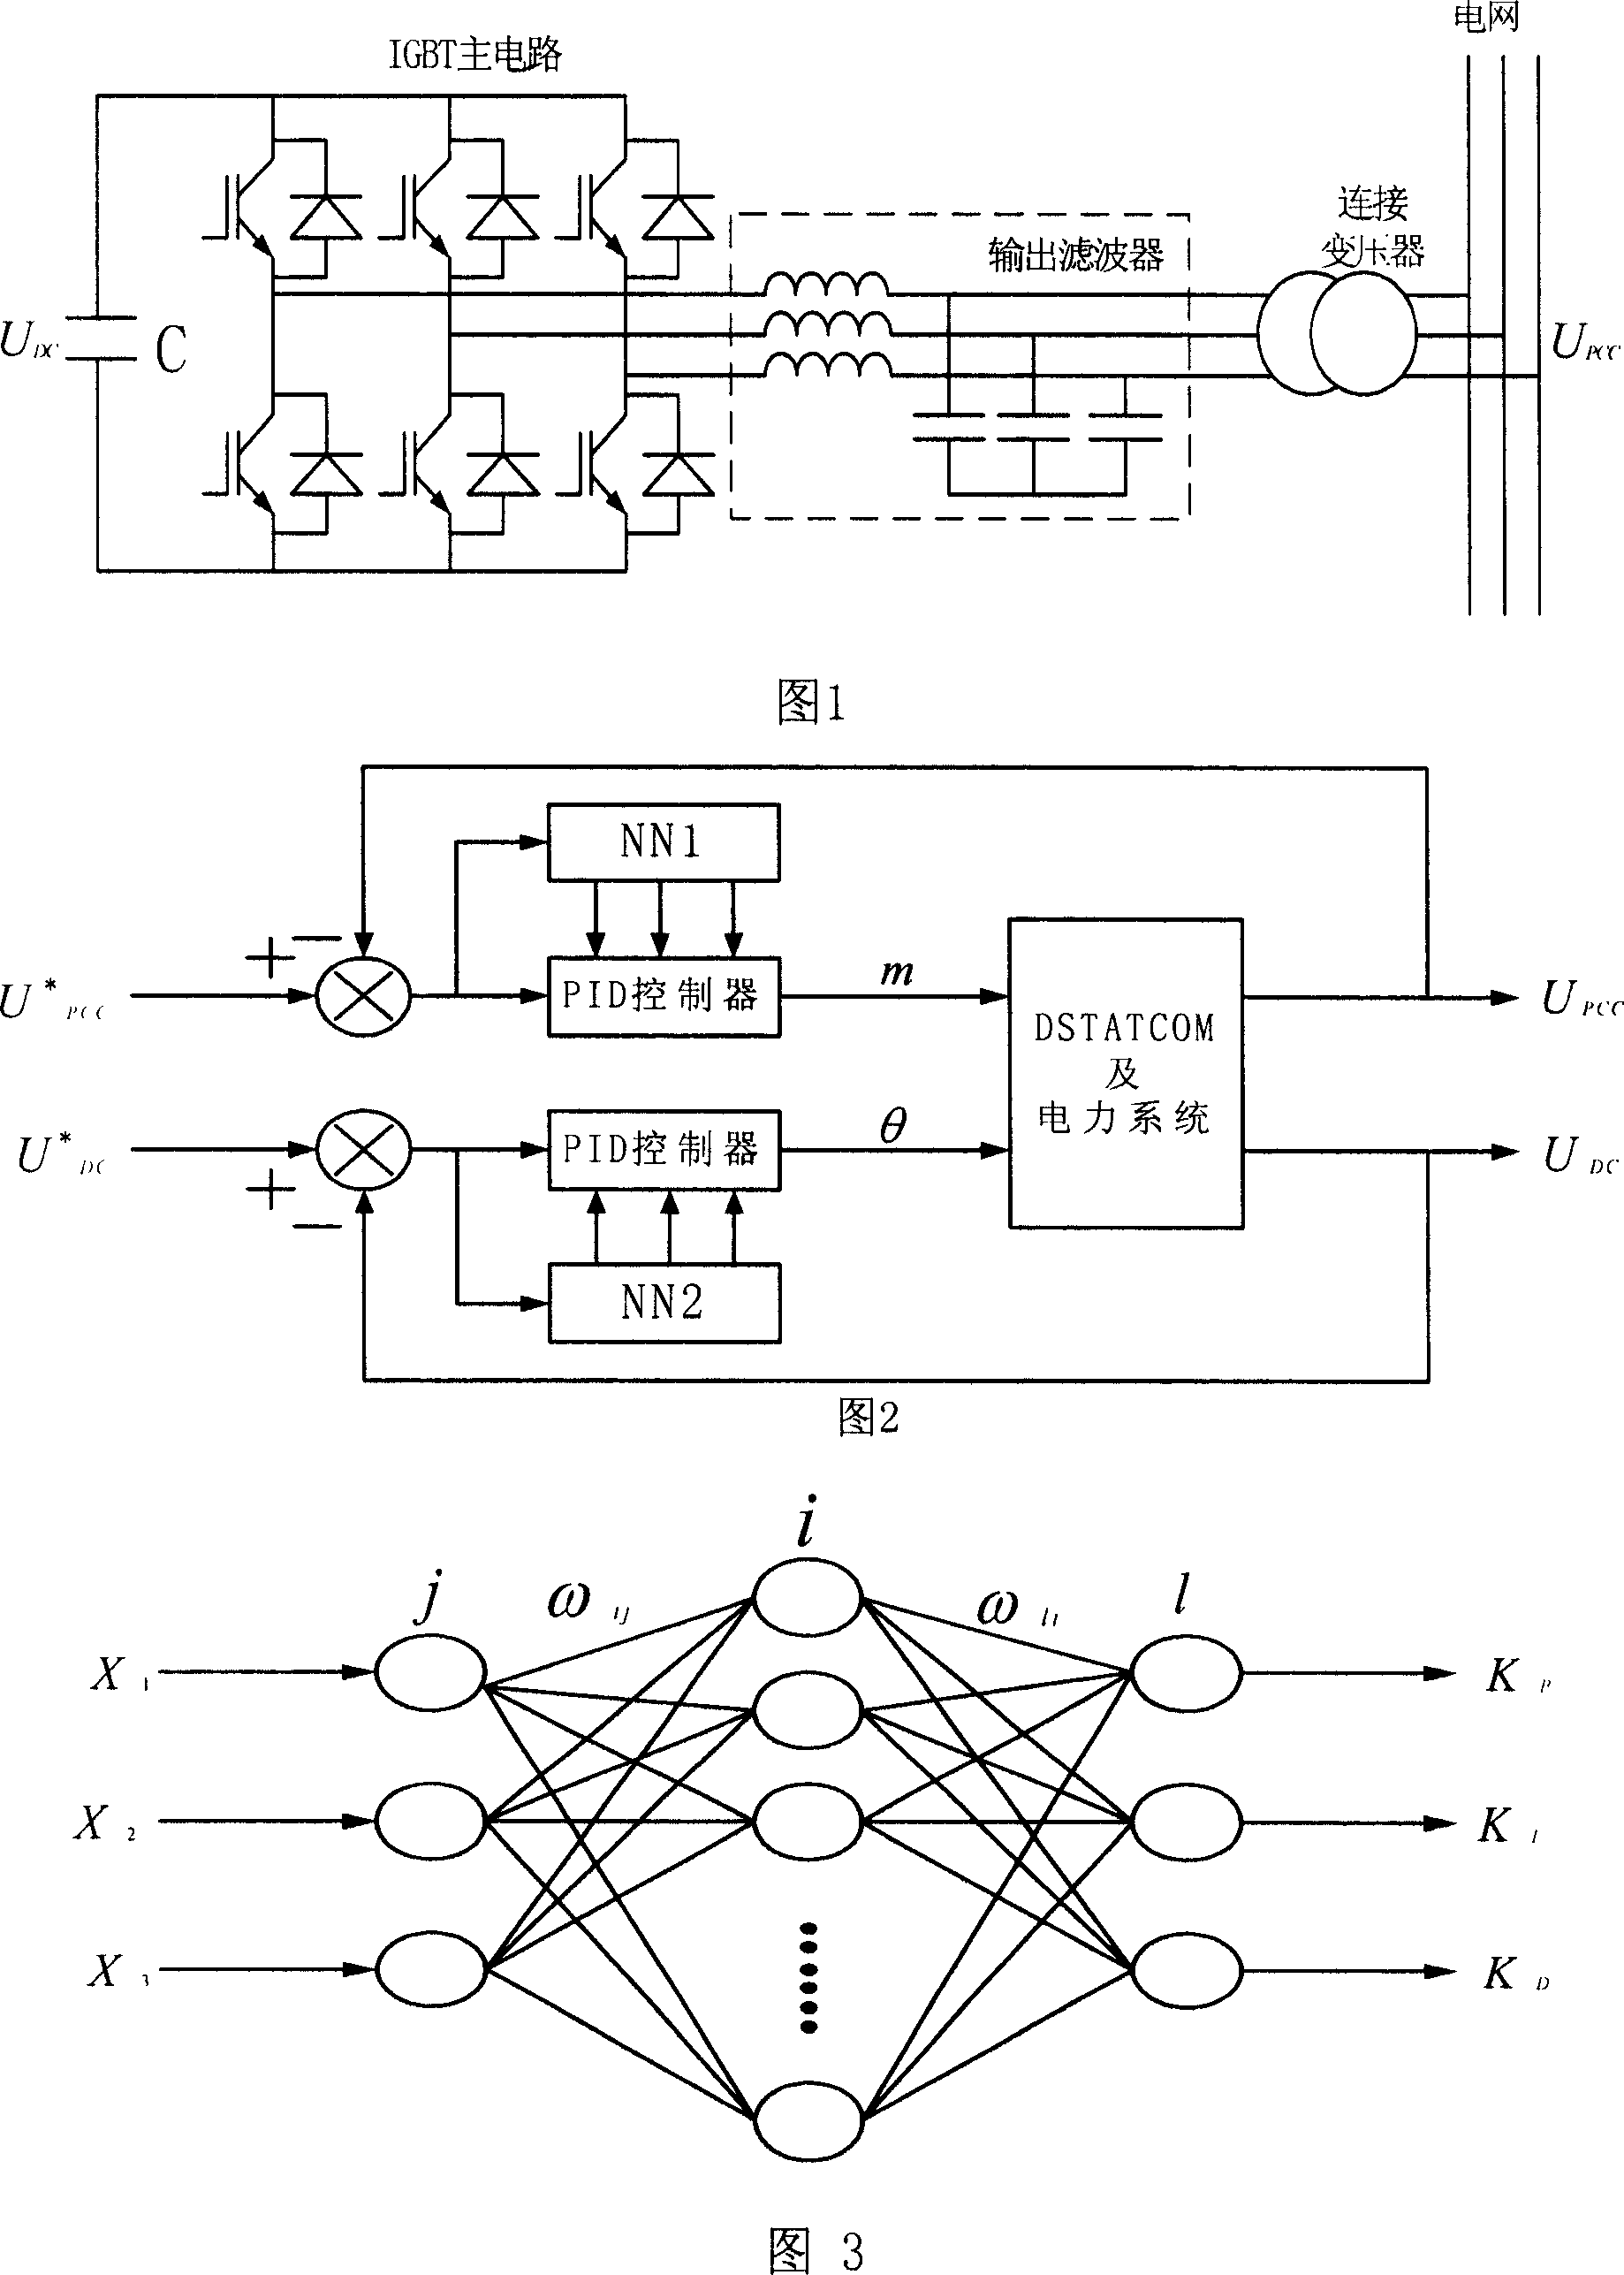 Multi-variant control method of the distribution static reactive power generator